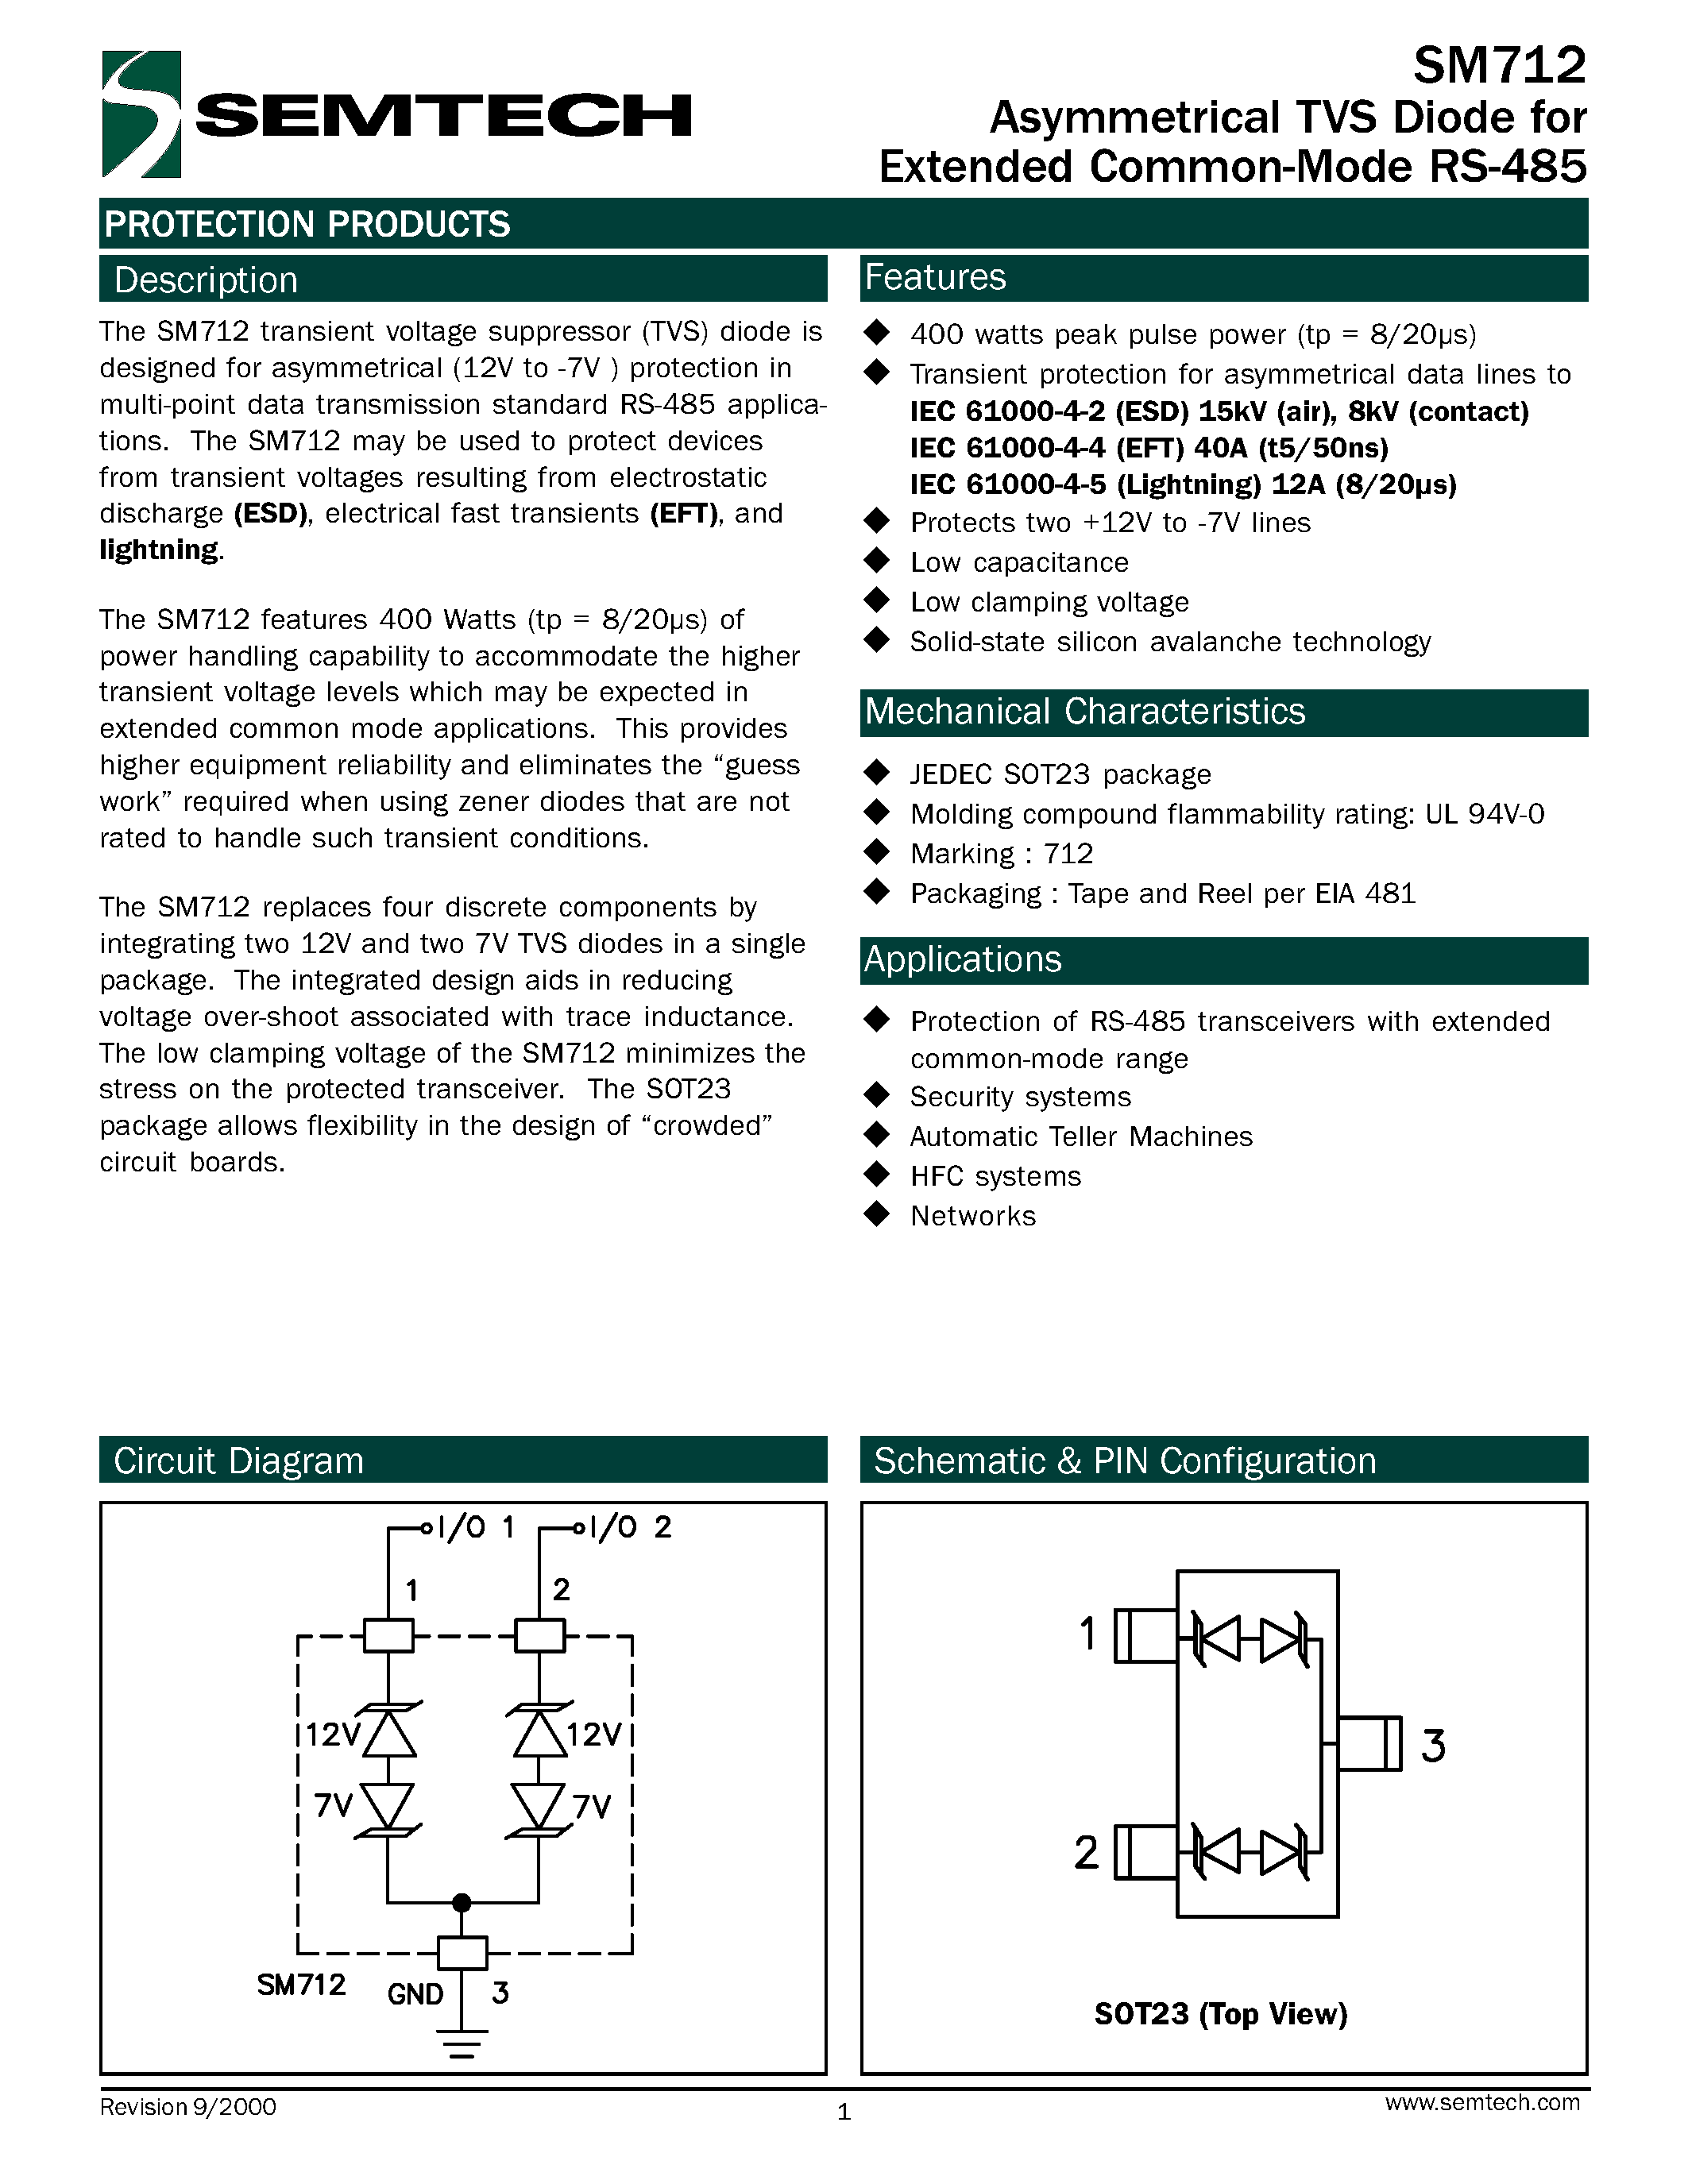 Datasheet SM712 - Asymmetrical TVS Diode for Extended Common-Mode RS-485 page 1